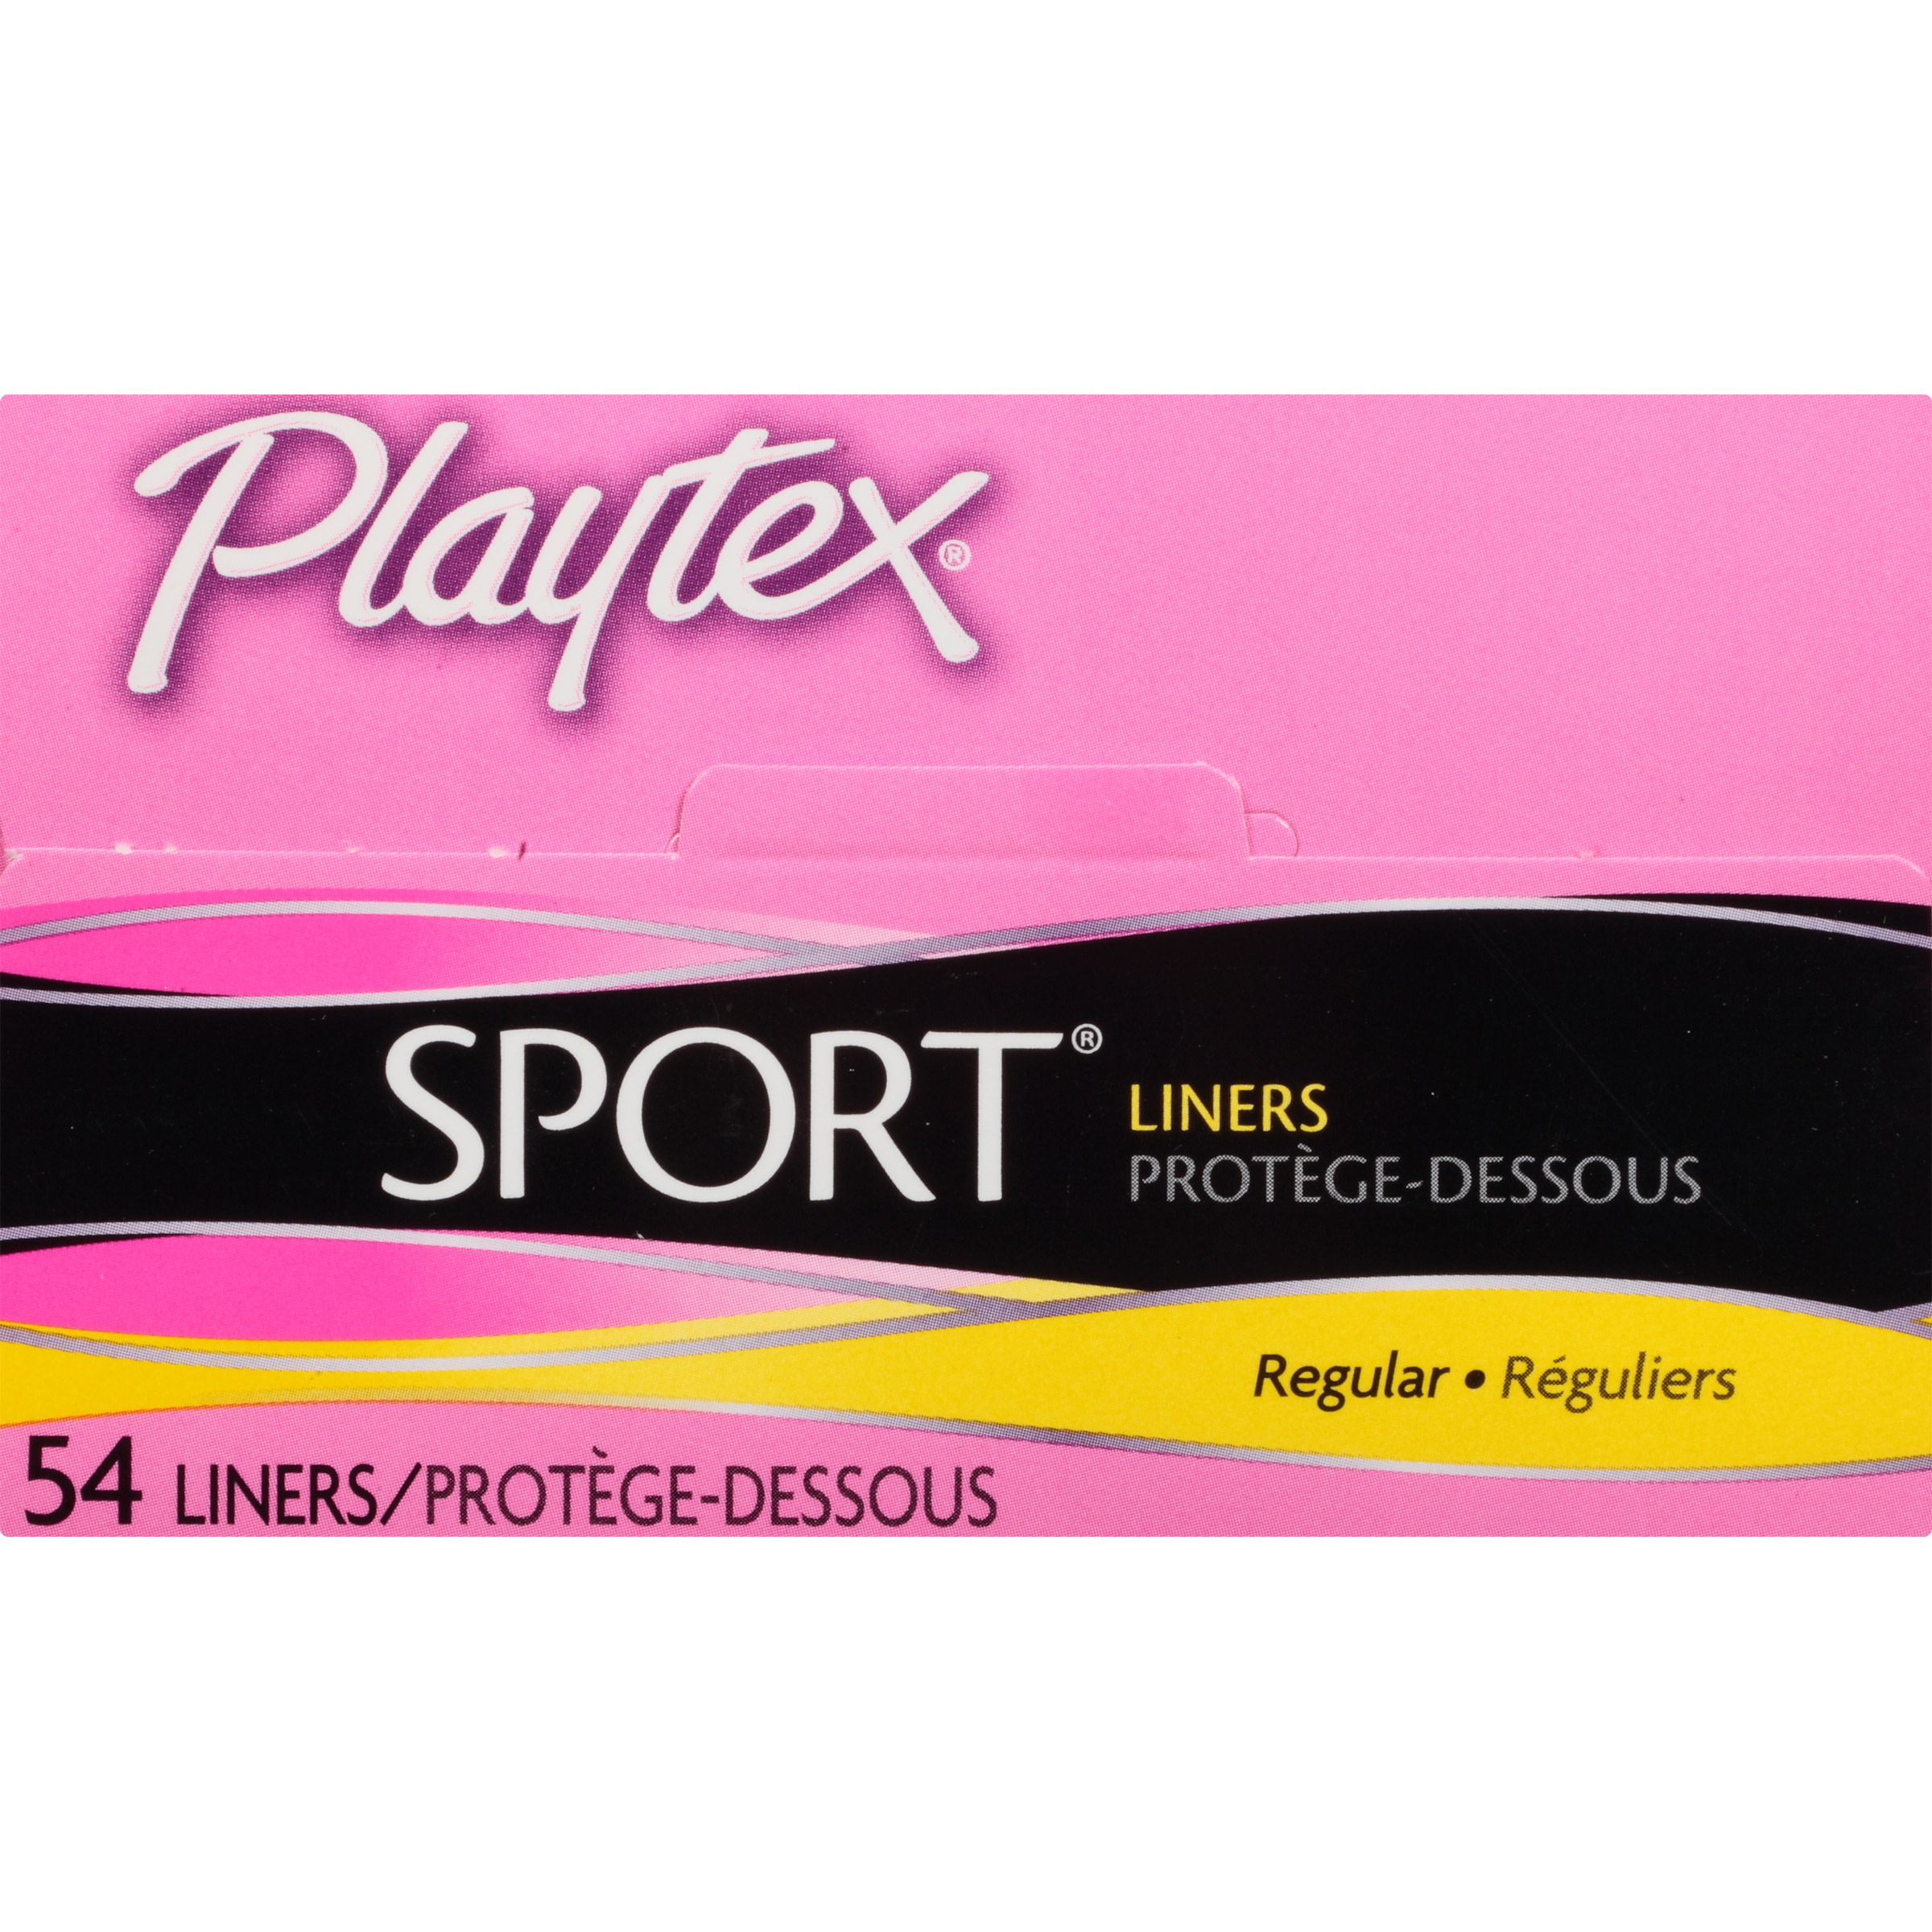 Playtex Sport Body Shaped Liners Regular Absorbency - 54 Count - image 4 of 4